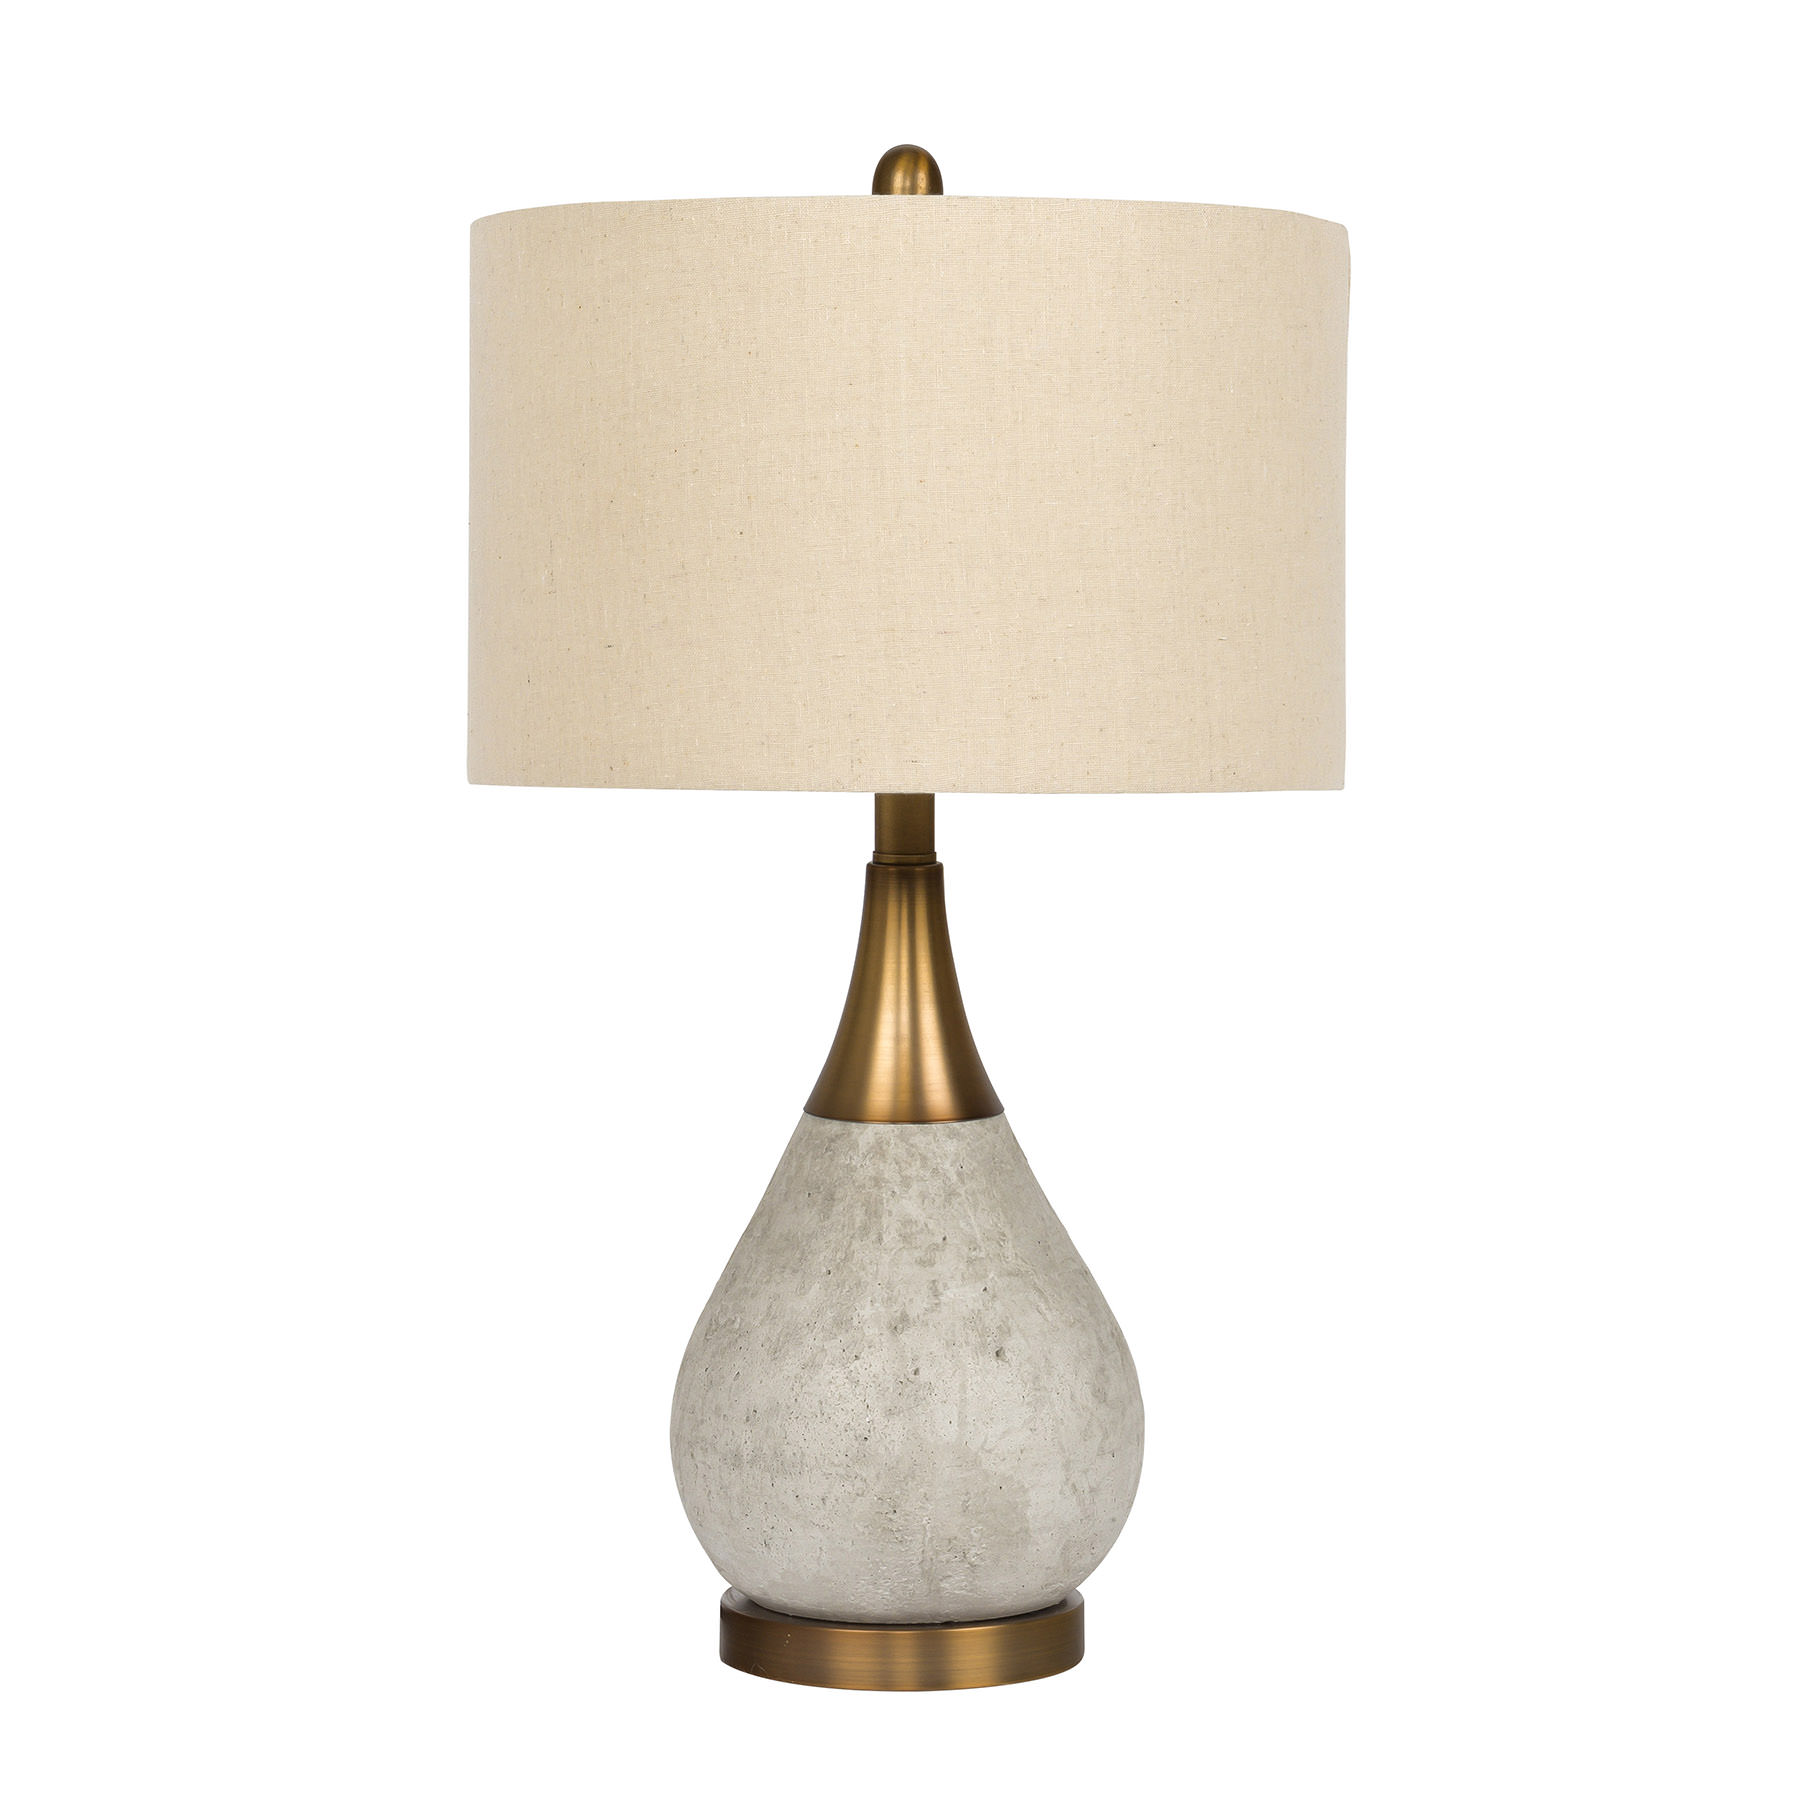 Craftmade 86237 1 Light Concrete/Metal Base Table Lamp in Natural Concrete / Antique Brass